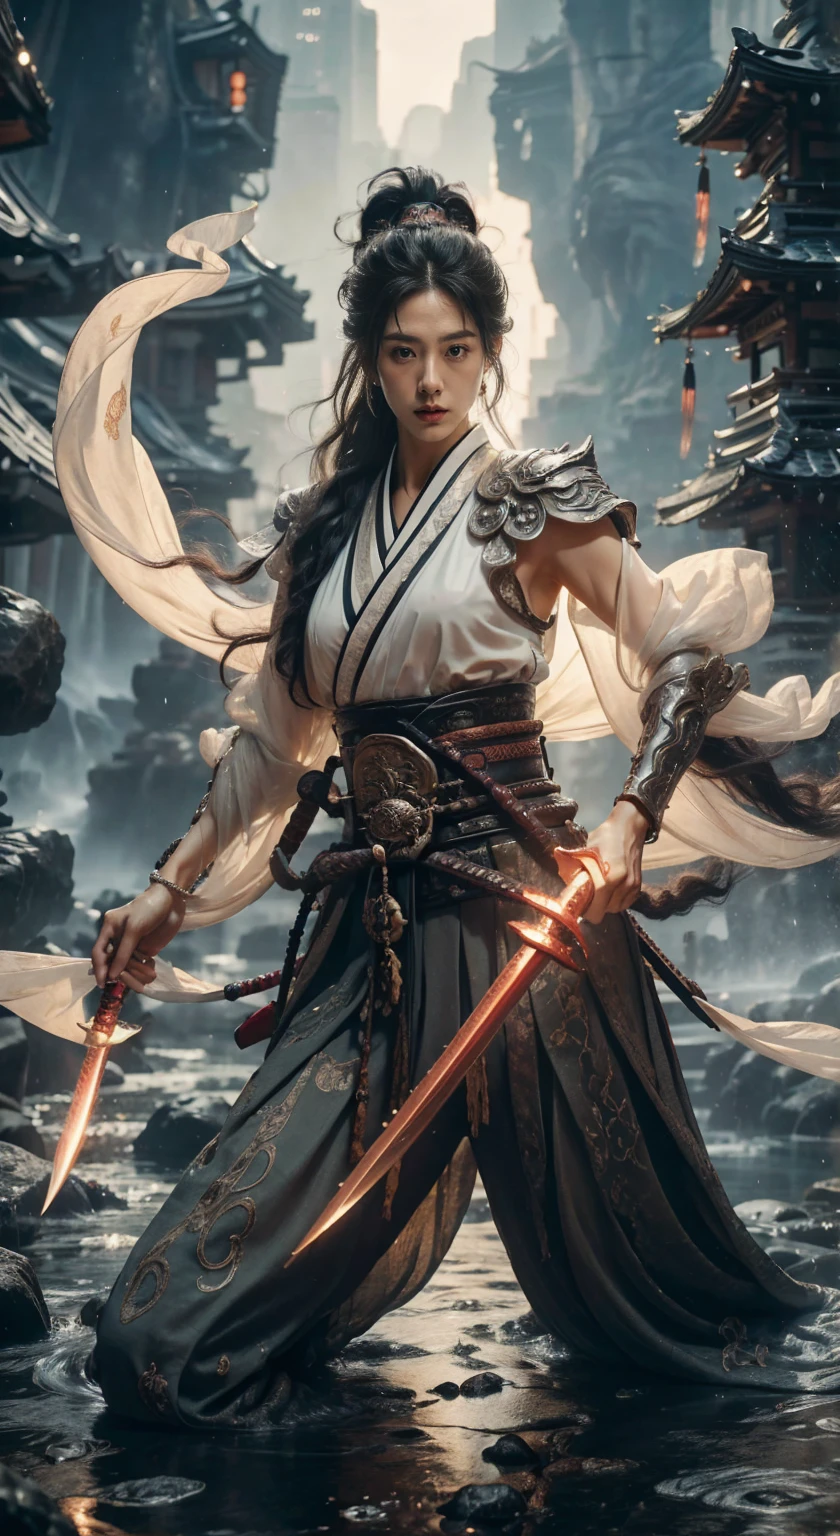 1girl,most beautiful, Sweet, elegant ,full body ,large breasts ,The background is rainy day,cityscape,1 girl, beautiful girl, beautiful face, Female Samurai, supermodels, Holding a Japanese Sword, shining bracelet, beautiful hanfu (red, transparent),cape, solo, {beautiful and detailed eyes}, calm expression, natural and soft light, delicate facial features, very small earringodel pose)), Glamor body type, (Black neon hair:1.2), beehive, long ponytail, very_long_hair, hair past hip, curly hair, flim grain, realhands, masterpiece, Best Quality, photorealistic, ultra-detailed, finely detailed, high resolution, perfect dynamic composition, beautiful detailed eyes, eye smile, ((nervous and embarrassed)), sharp-focus, full_body, sexy pose, cowboy_shot, Samurai girl, glowing forehead, lighting, Japanese Samurai Sword (Katana)